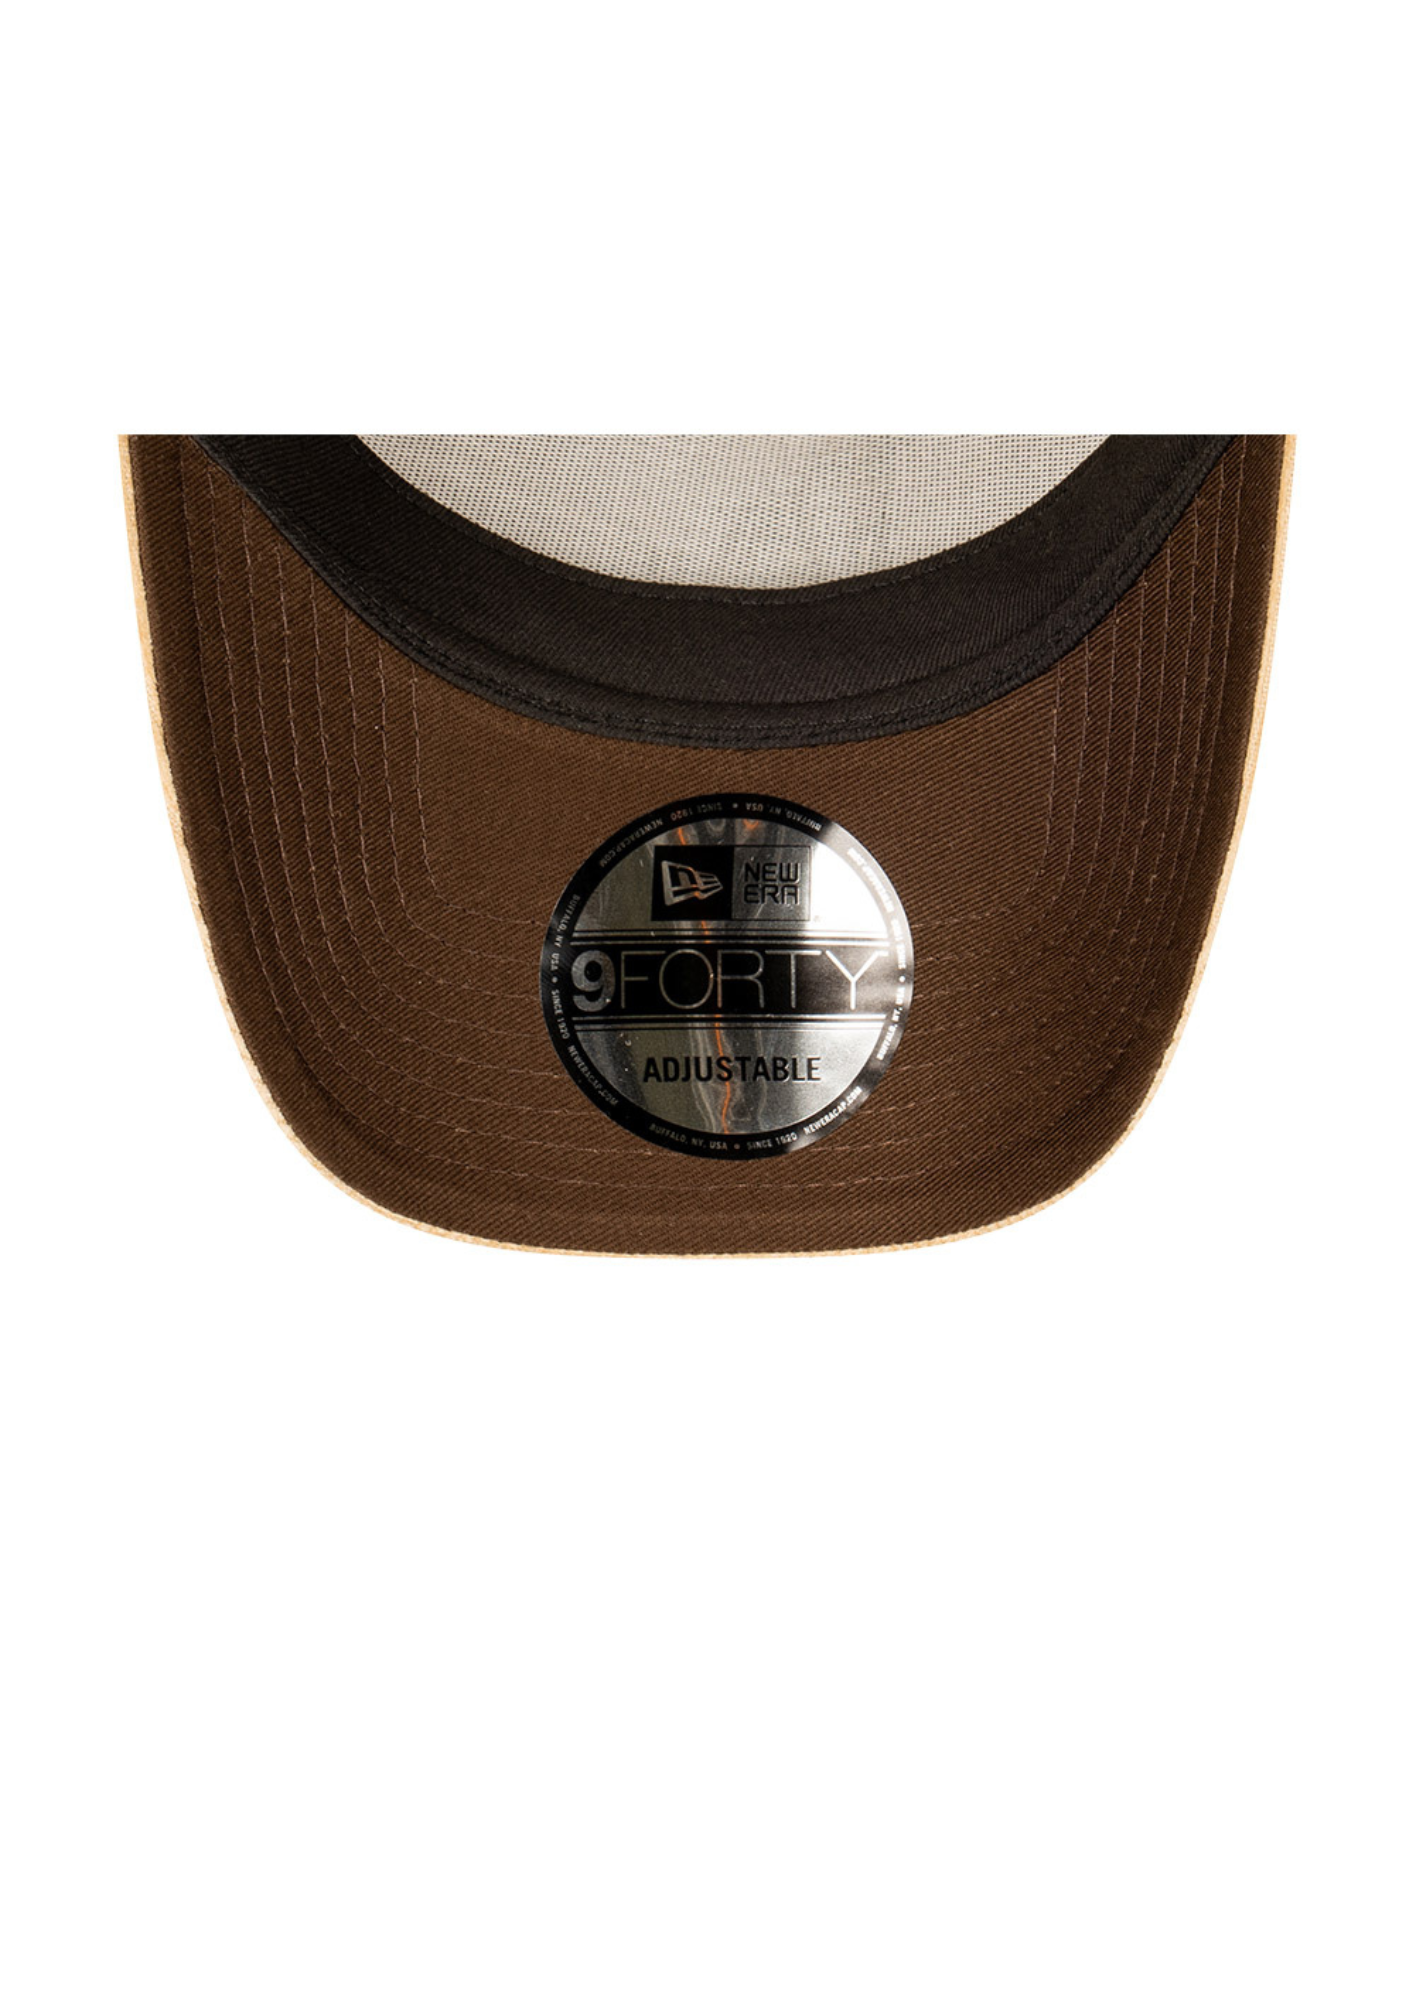 New Era 9Forty Cord Snap Back - Camel